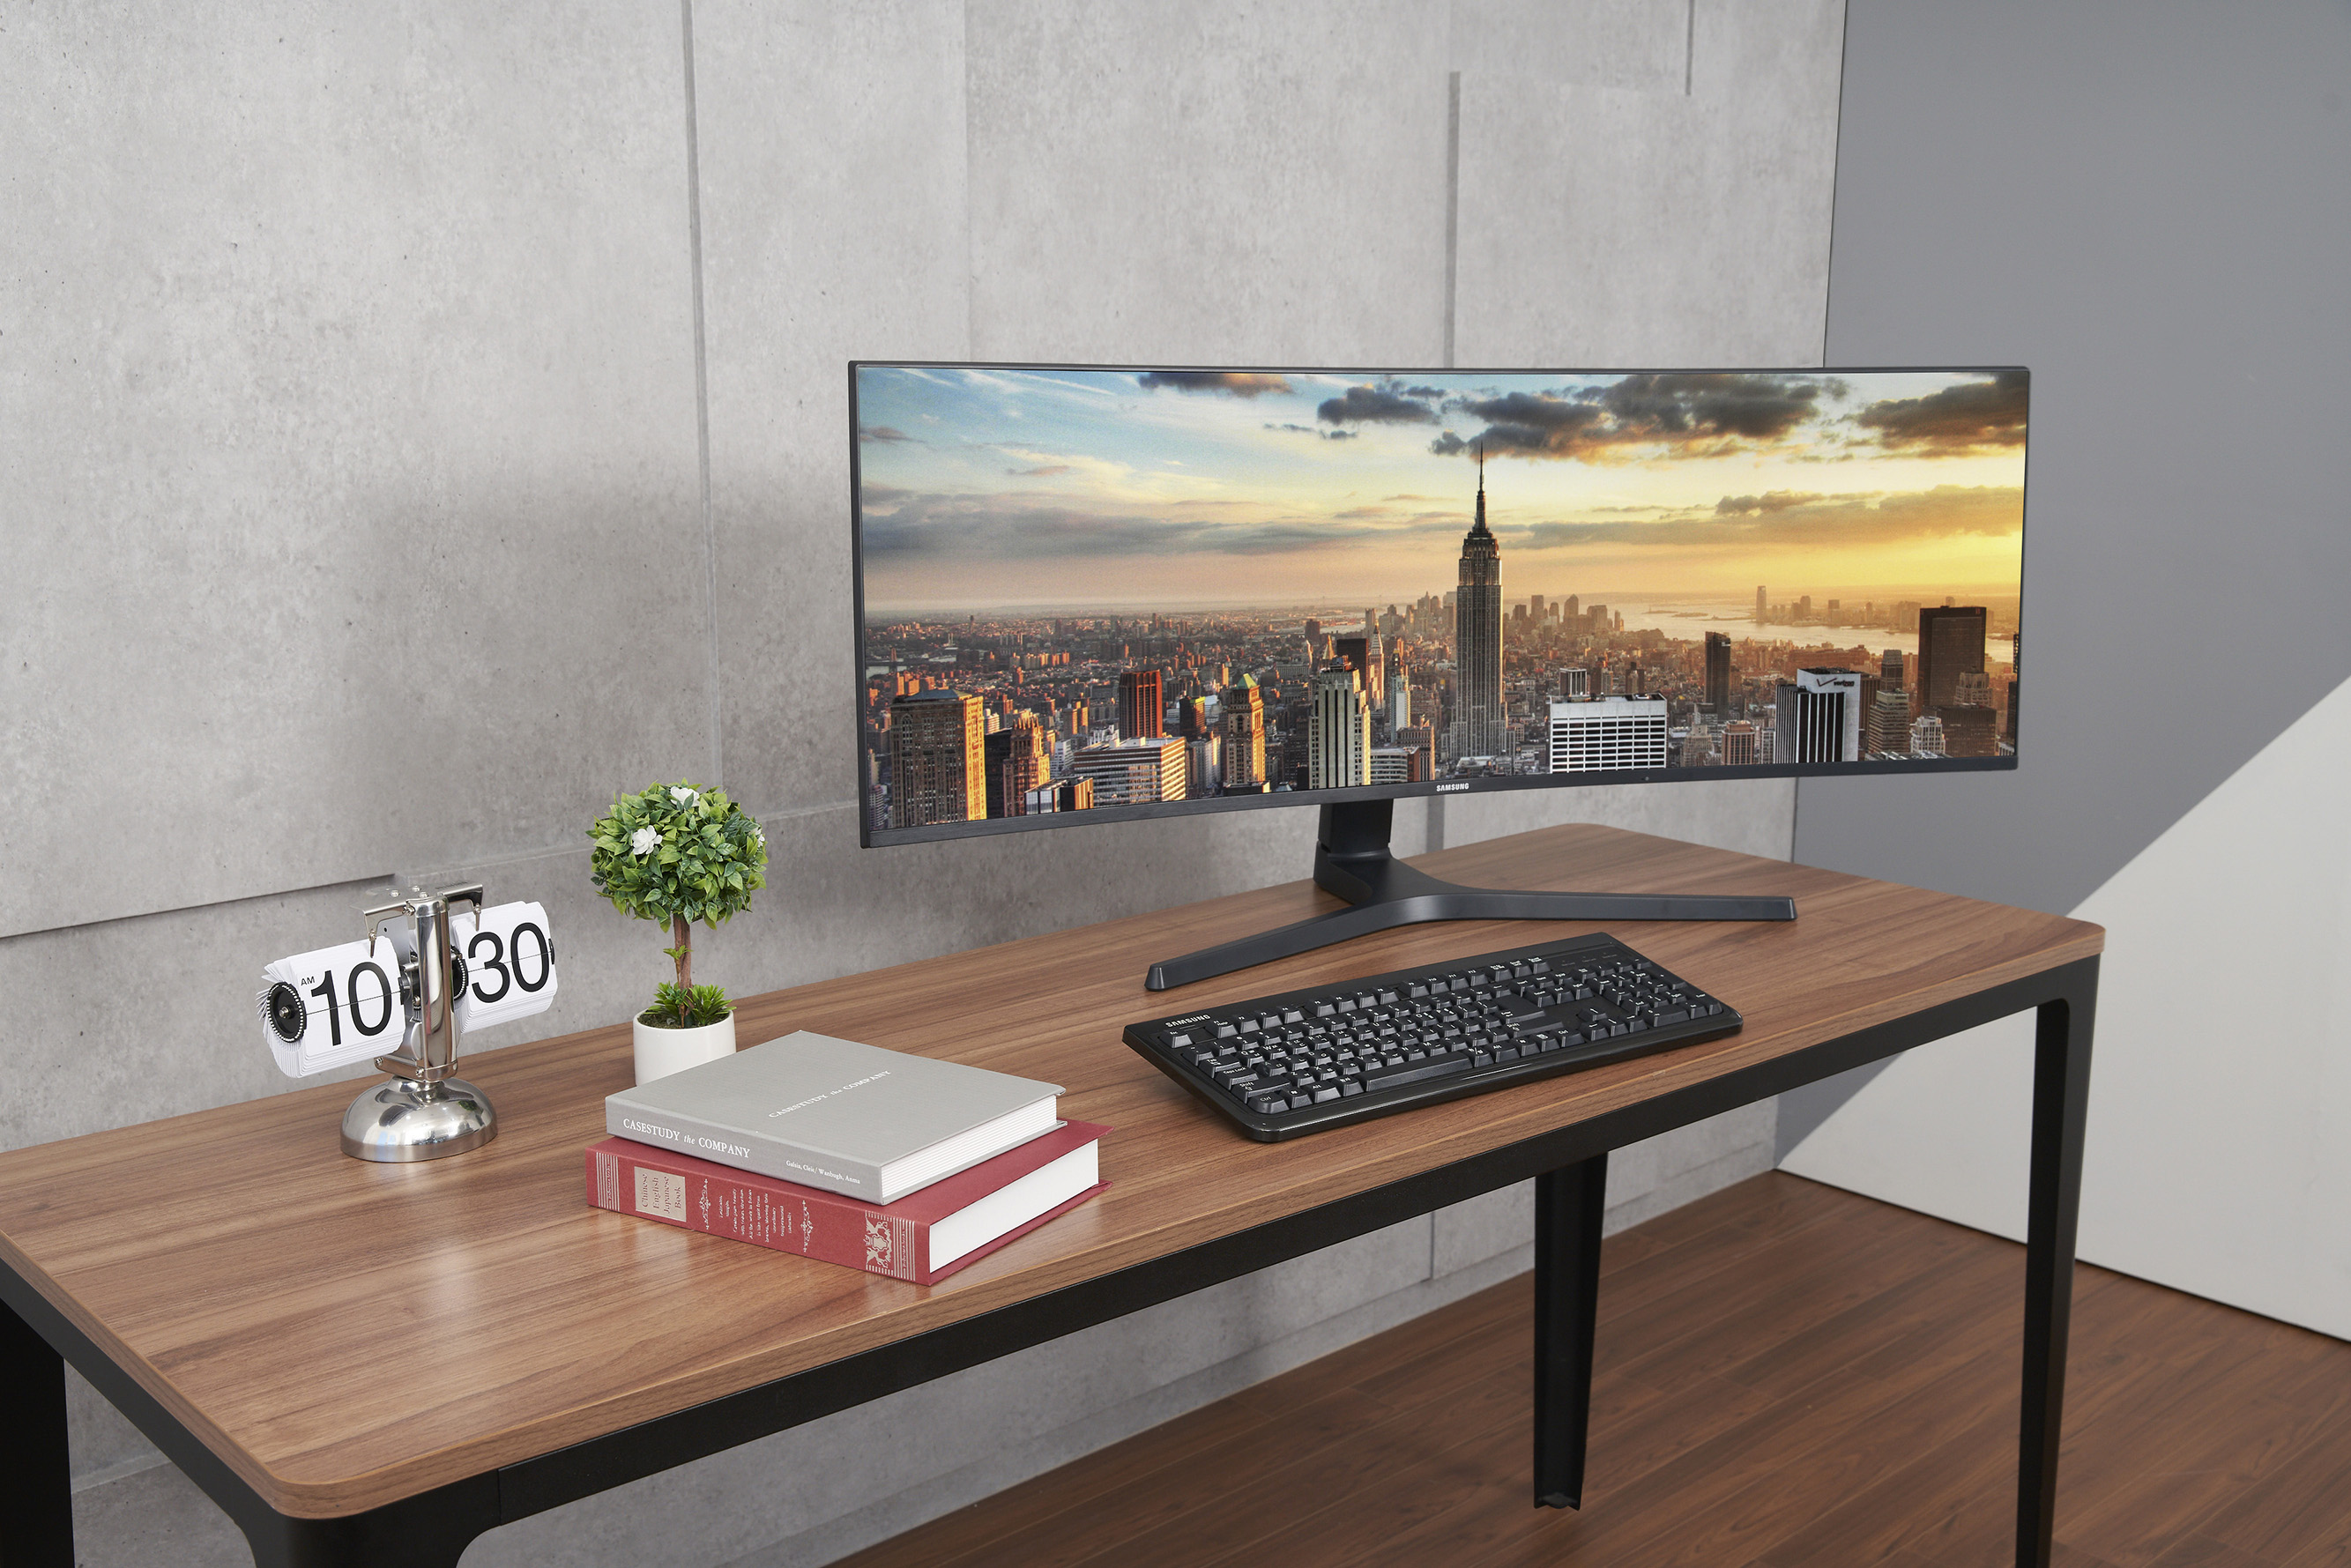 Samsung has unveiled a new monitor with a ultrawide curved